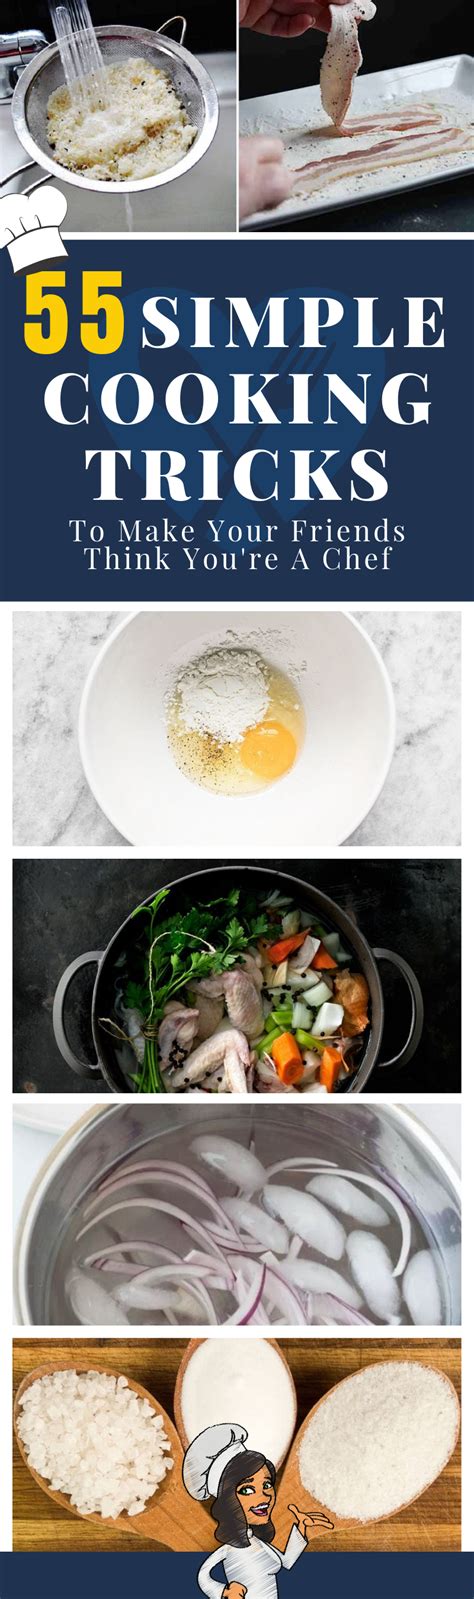 55 Simple Cooking Tricks To Make Your Friends Think Youre A Chef